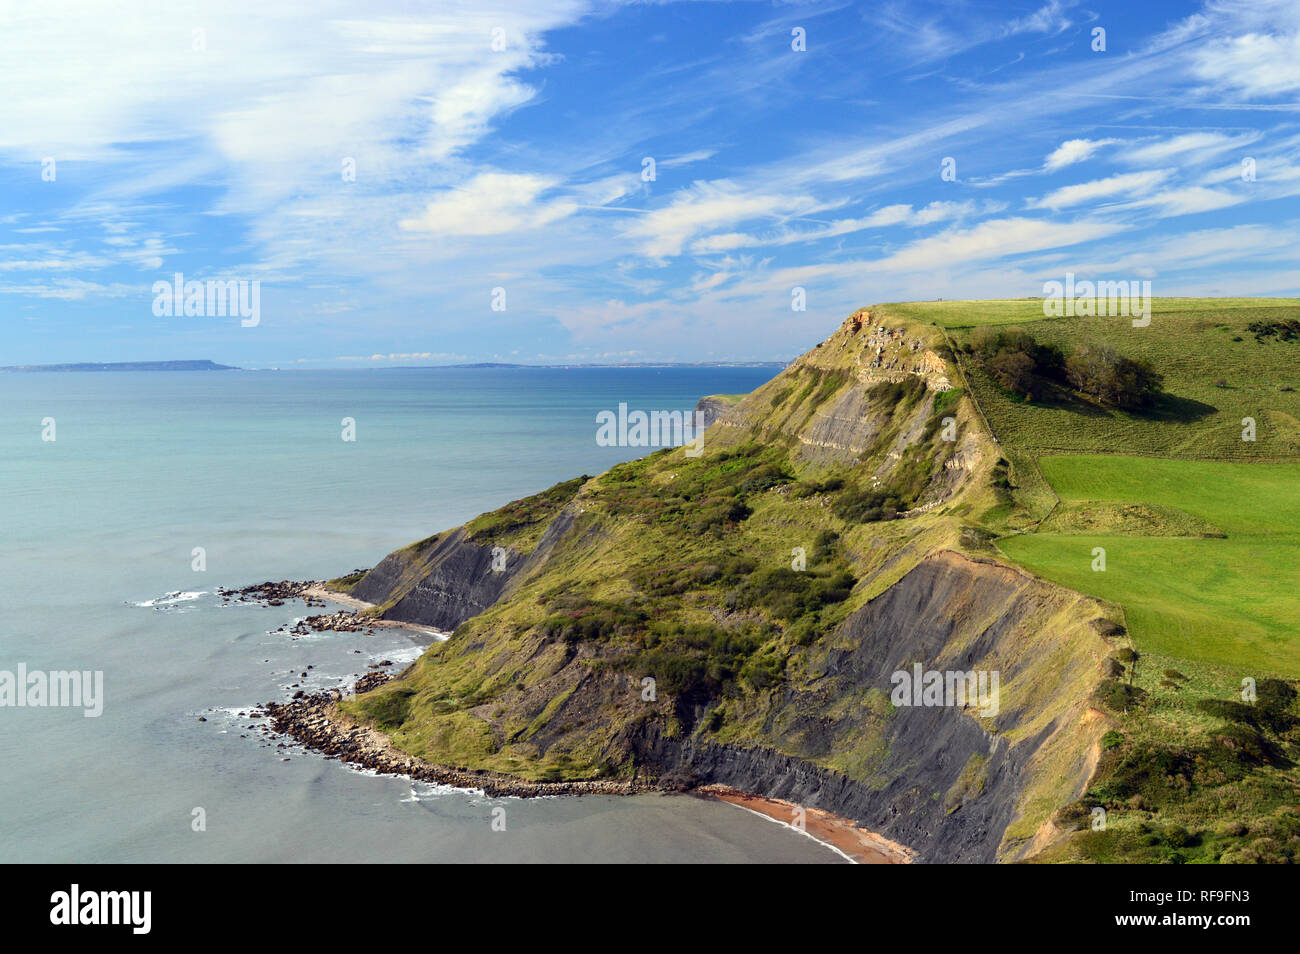 Houns-tout Cliff above Egmont Point from Emmetts Hill on the South West Costal Path in Dorset, England, UK. Stock Photo